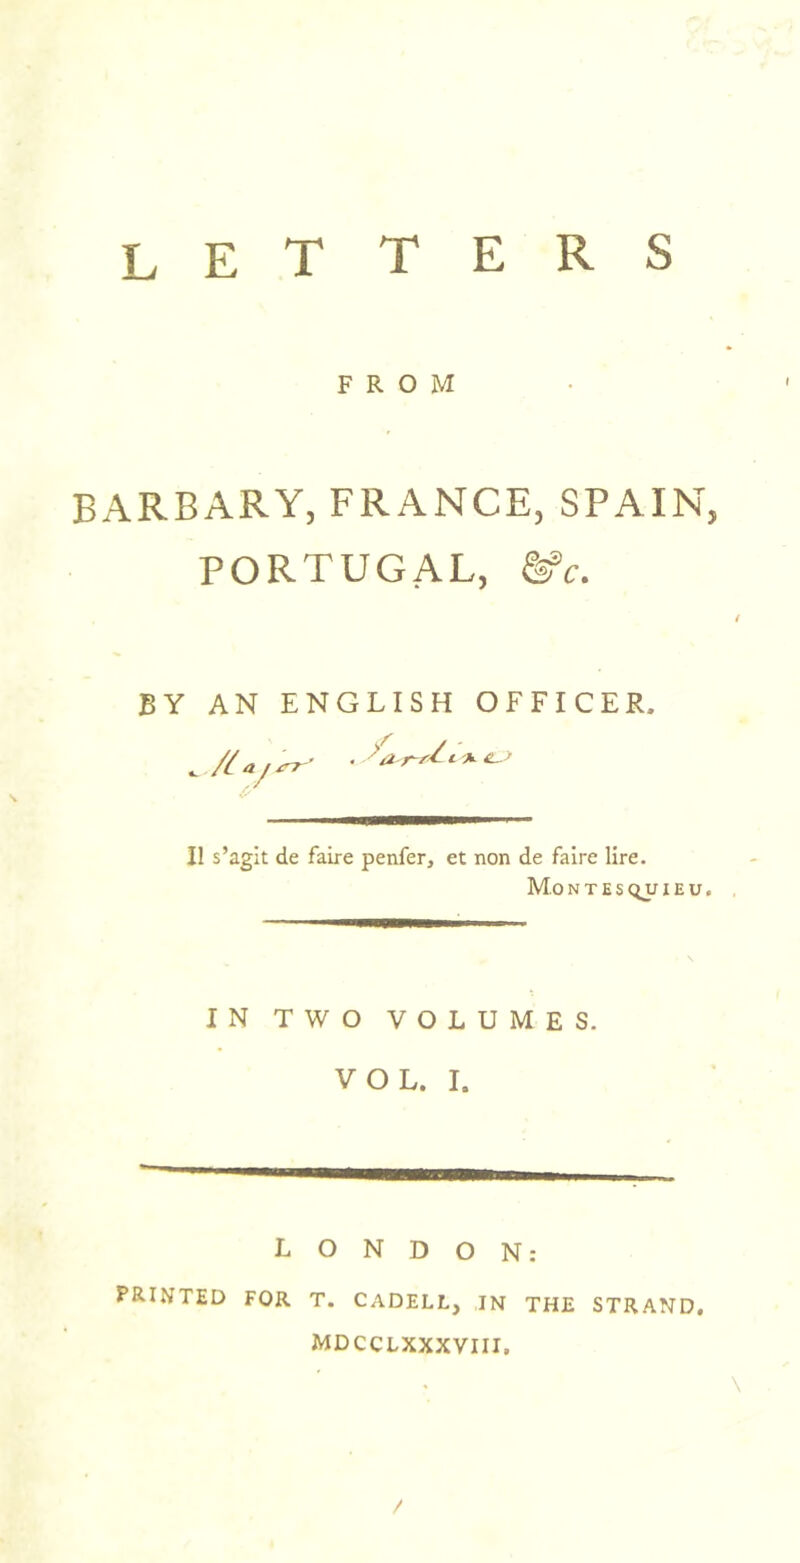 letters FROM BARBARY, FRANCE, SPAIN, PORTUGAL, BY AN ENGLISH OFFICER. . / II s’agit de faire penfer, et non de faire lire. Mo N T E S QU I E U. IN TWO VOLUMES. VOL. I. LONDON: PRINTED FOR T. CADELL, IN THE STRAND, MDCCLXXXVIII, \